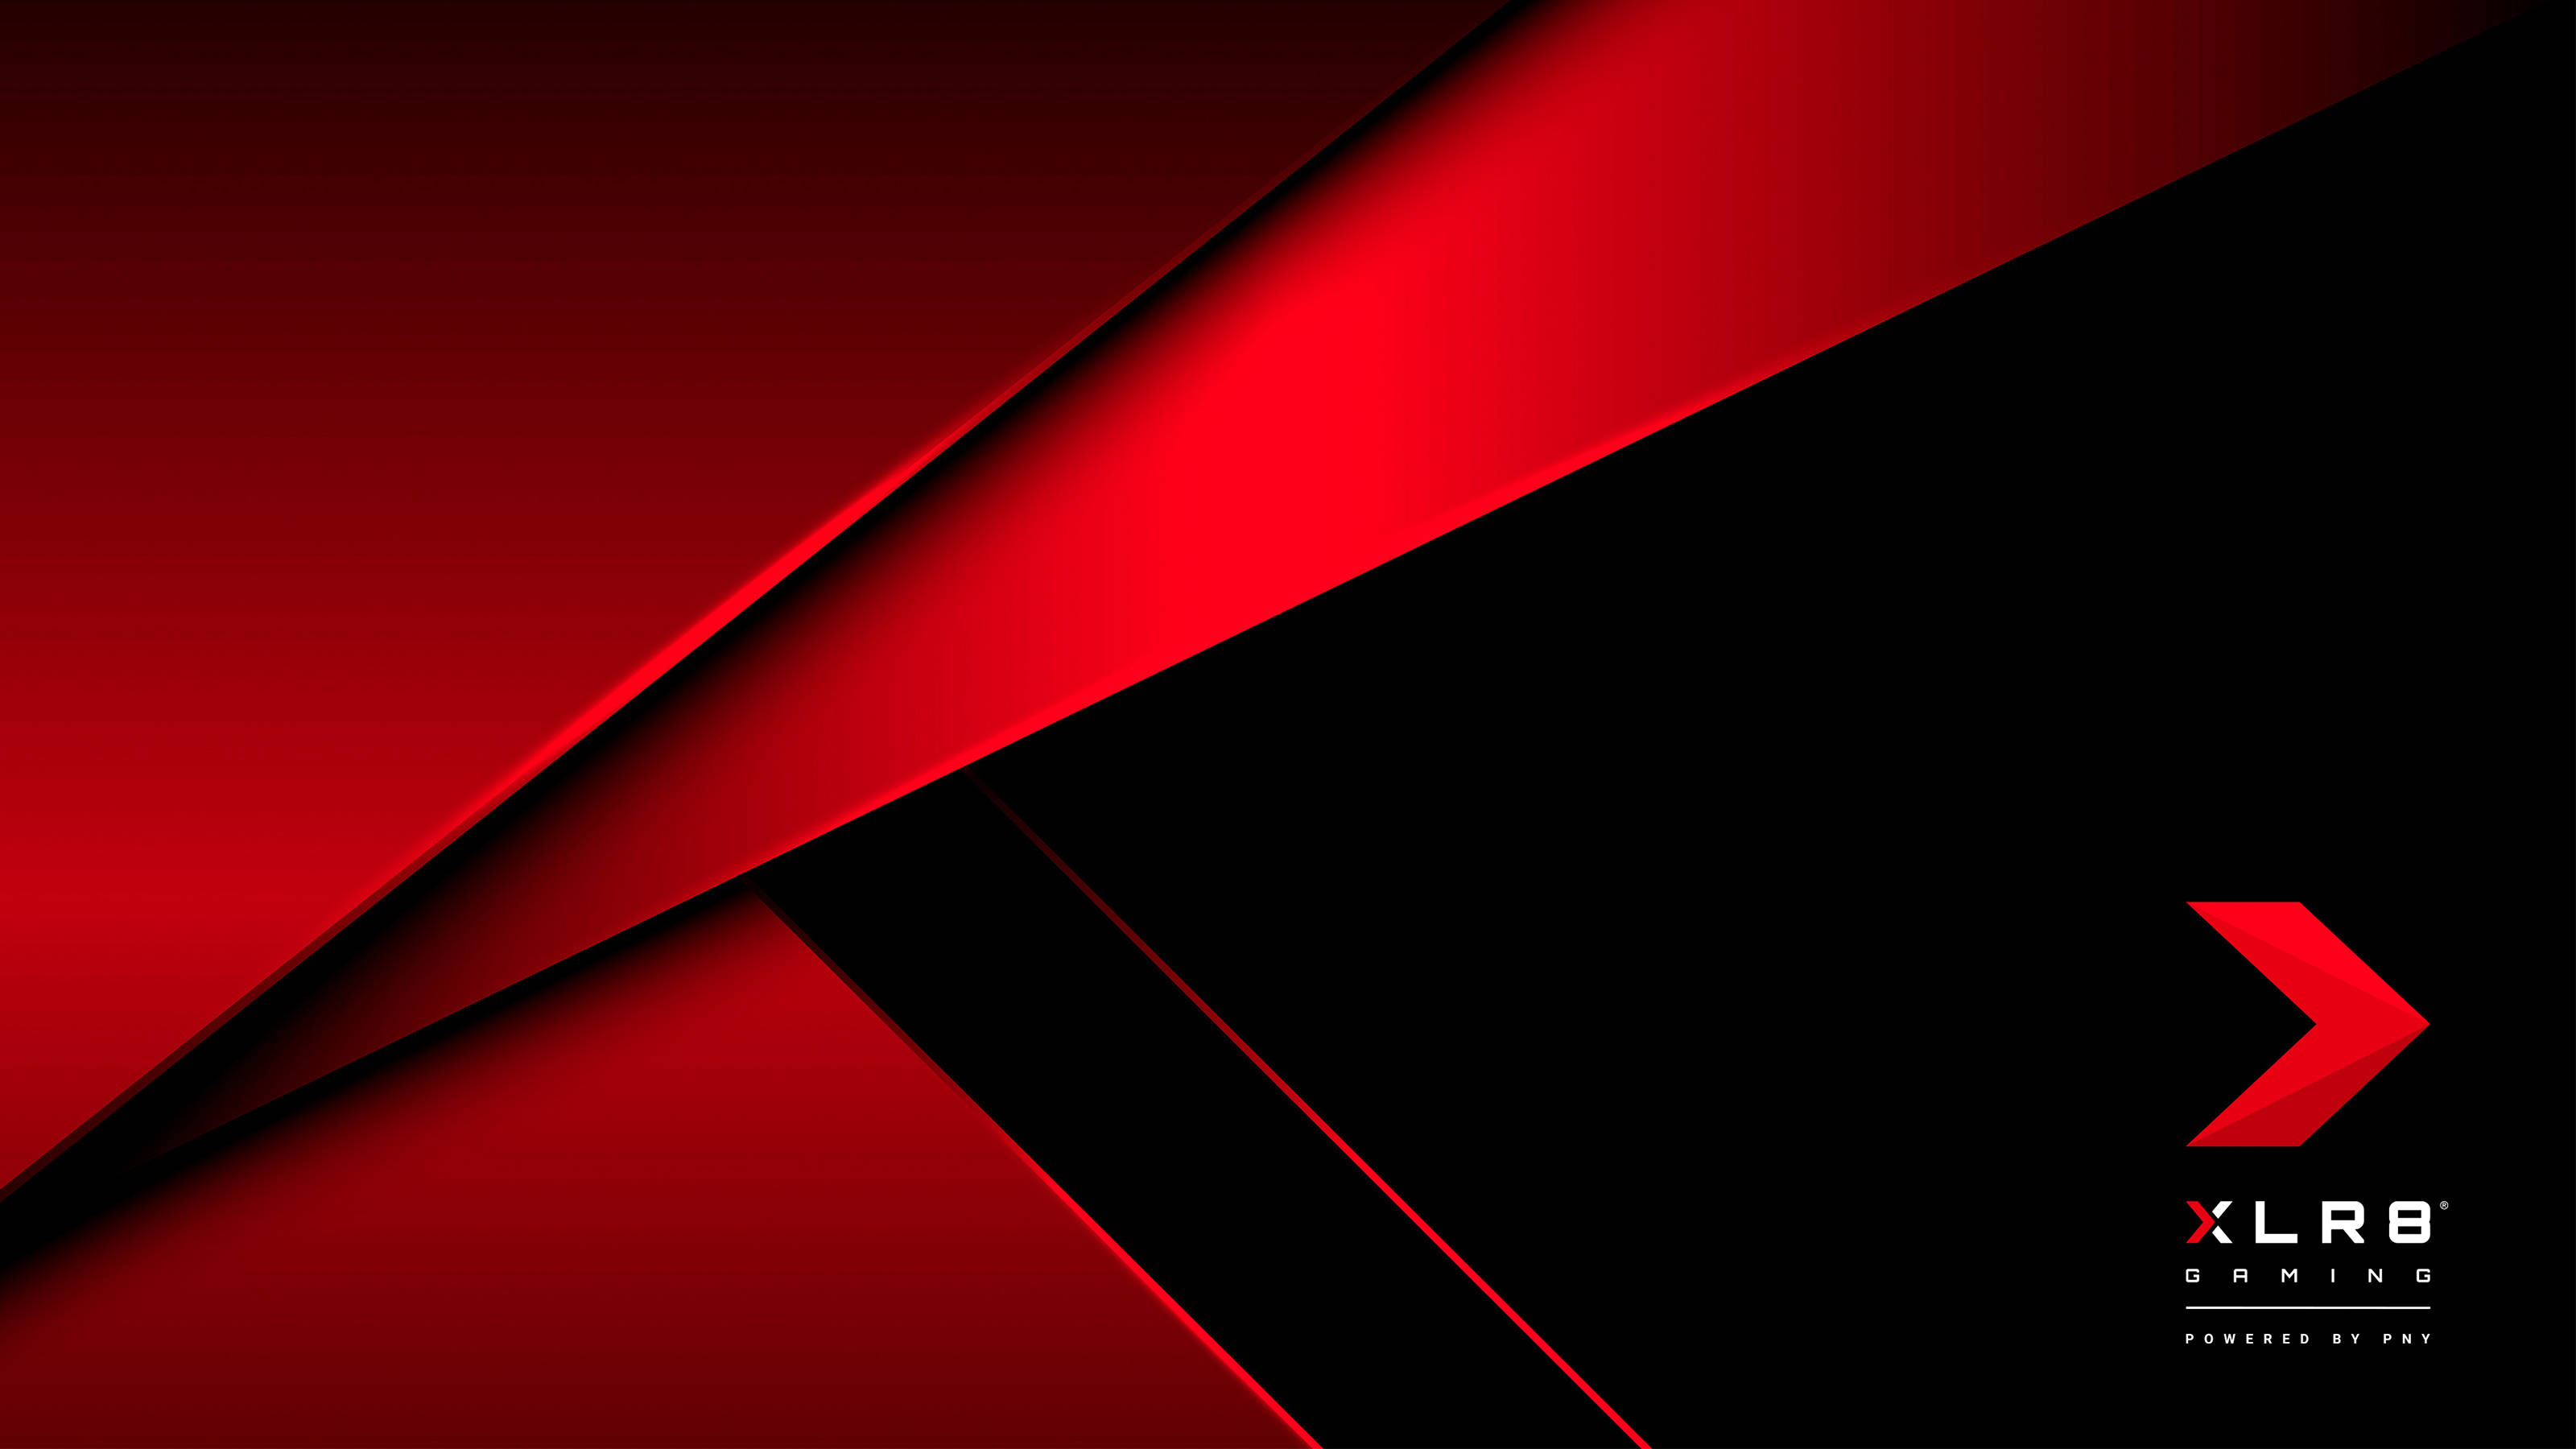 Black And Red Gaming XLR8 Wallpaper